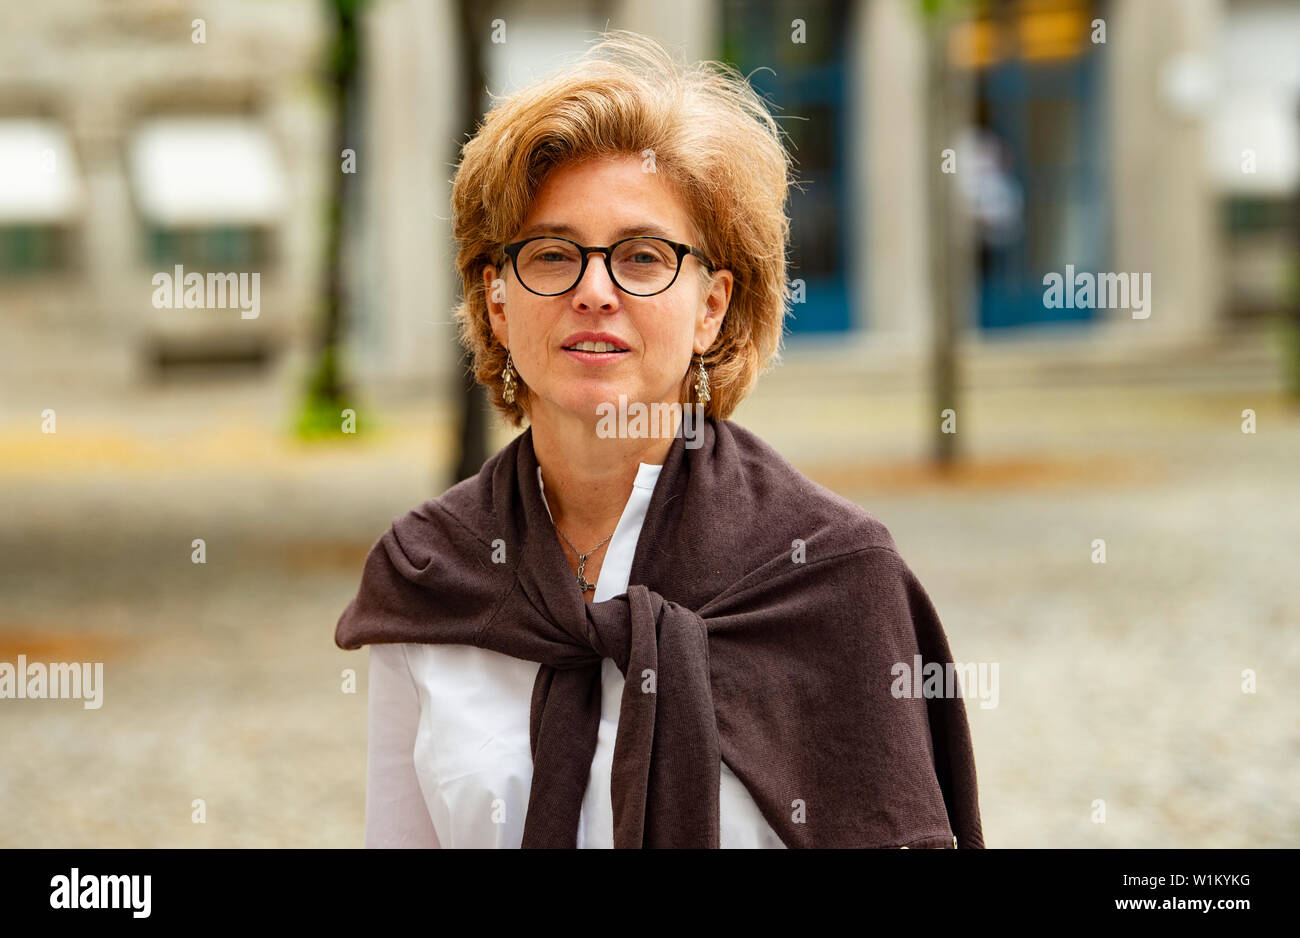 Berlin, Germany. 03rd July, 2019. Sophie von Bechtolsheim, granddaughter of Claus Schenk Graf von Stauffenberg, has written a new book 'Stauffenberg - My grandfather was no assassin' about her grandfather. It was introduced at a press conference. Credit: Paul Zinken/dpa/Alamy Live News Stock Photo